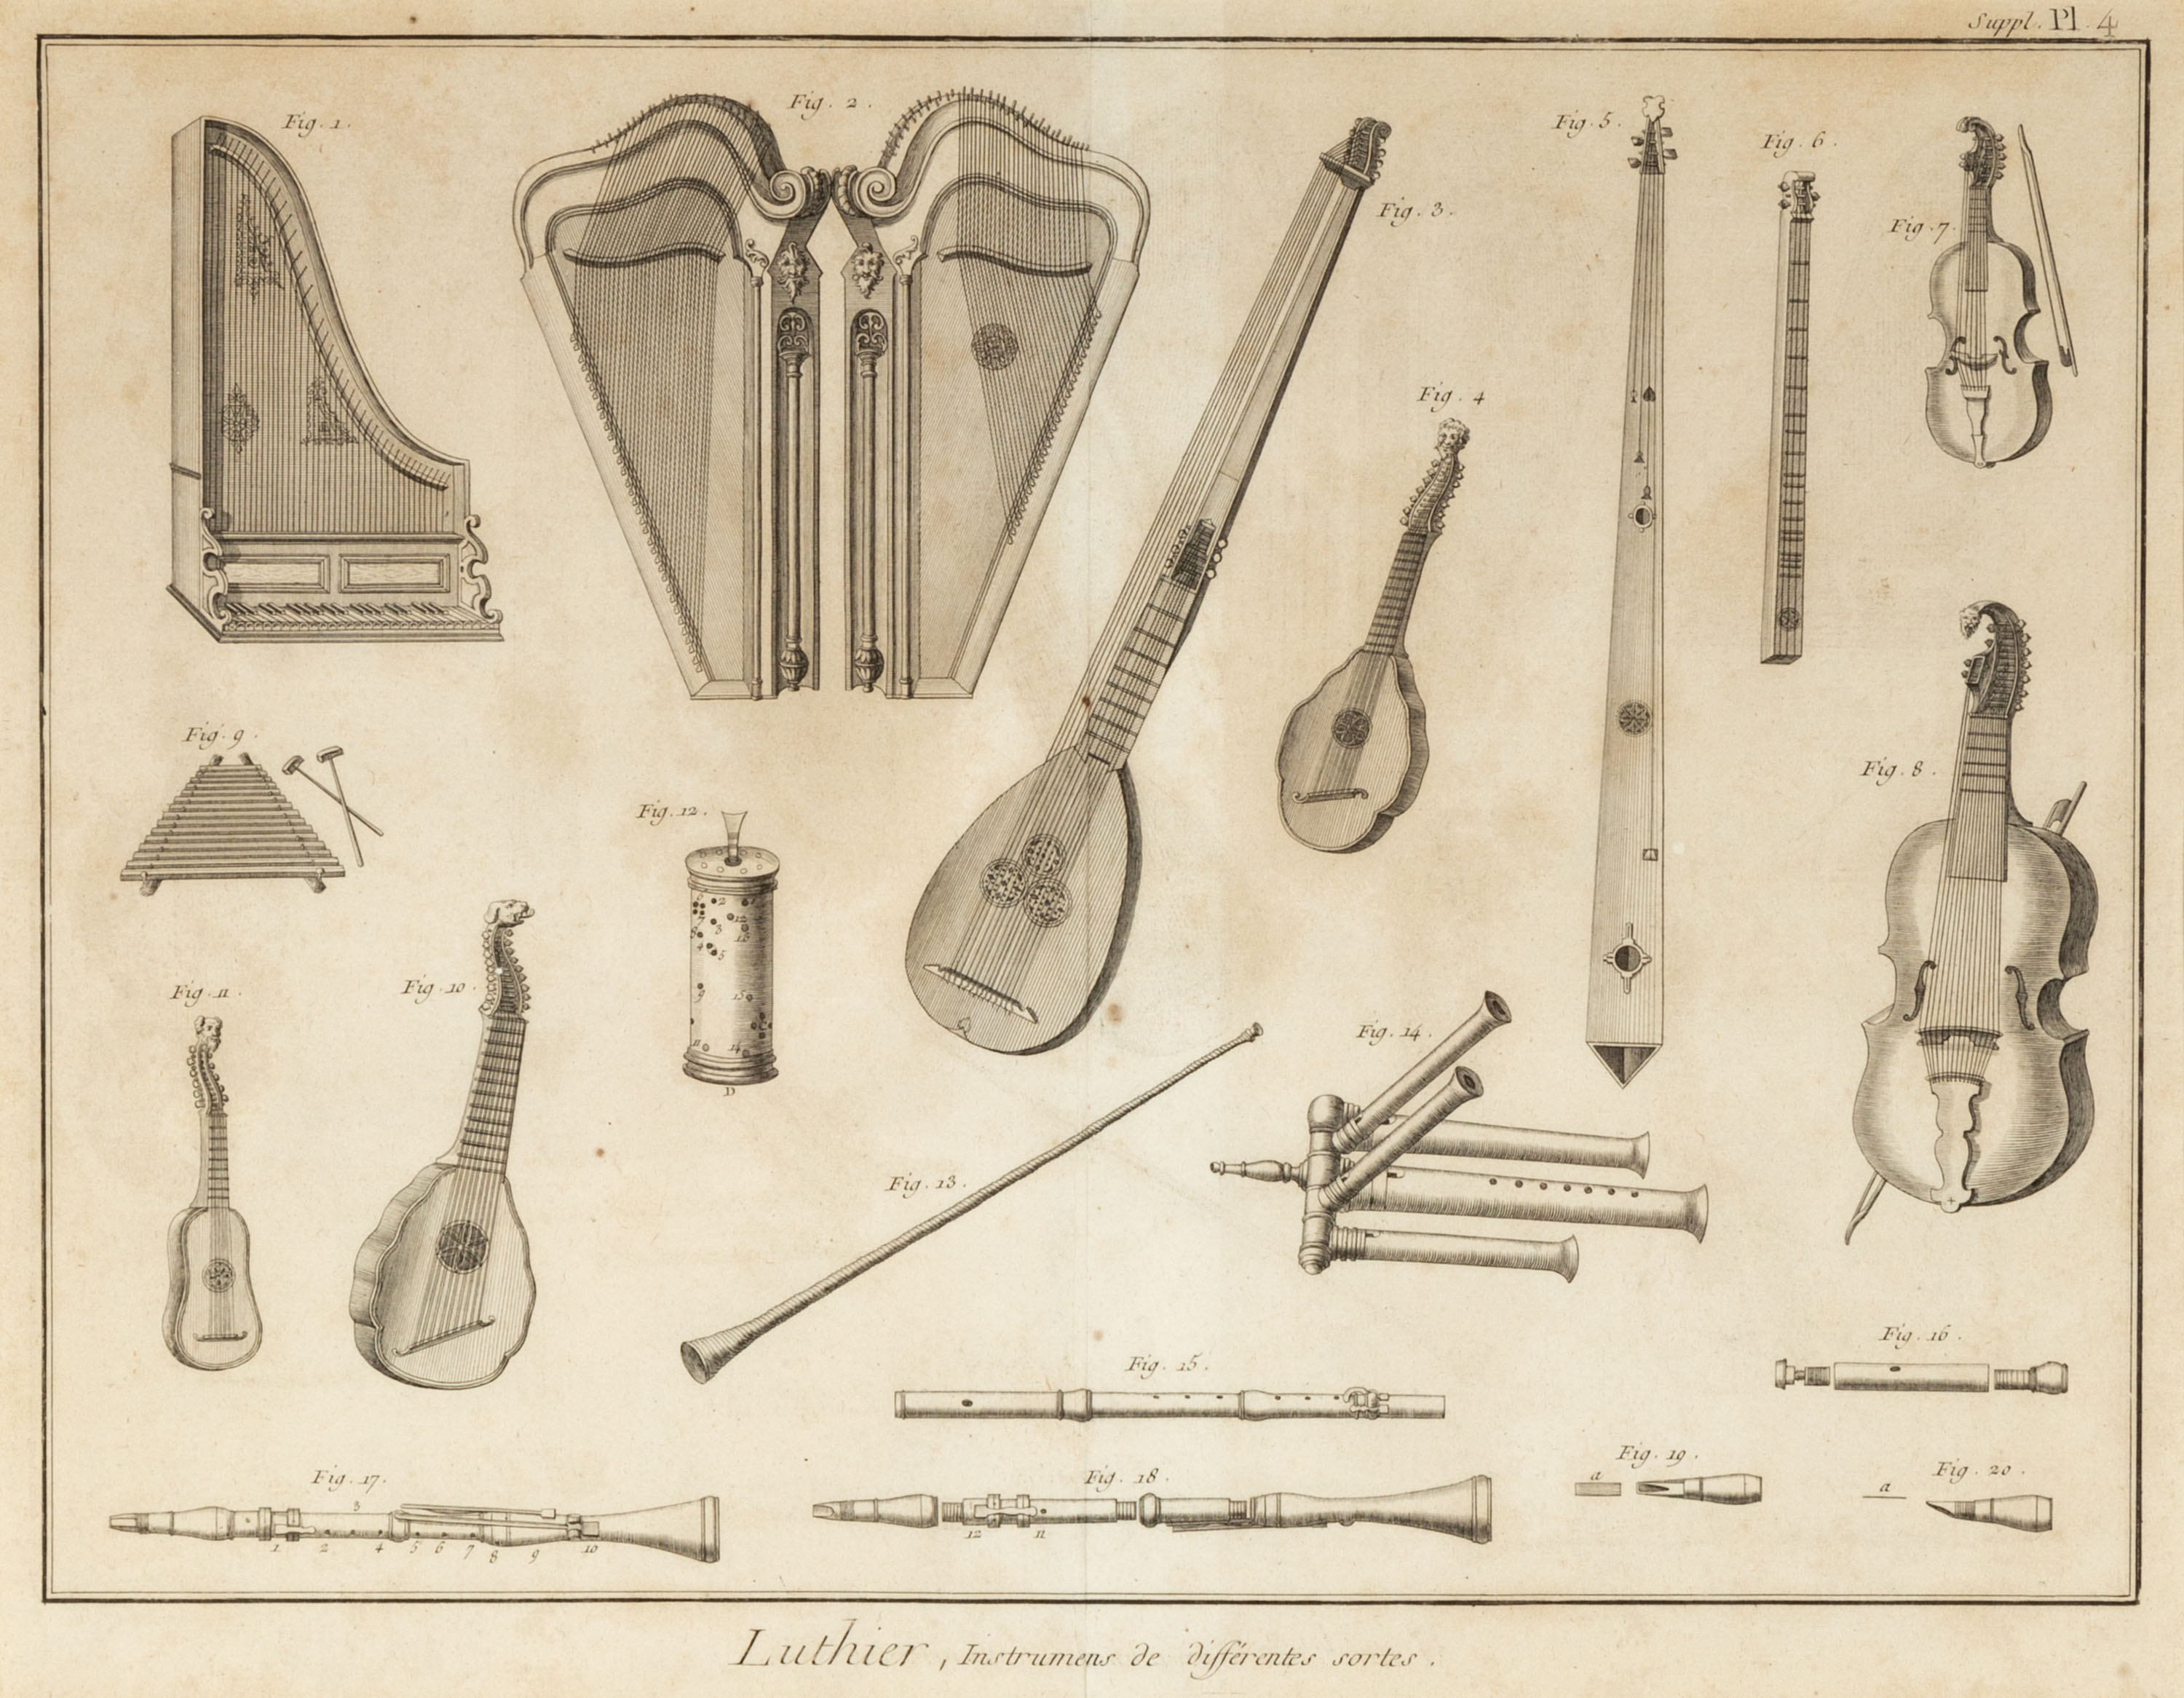 INSTRUMENTS FROM THE ENCYCLOPEDIA